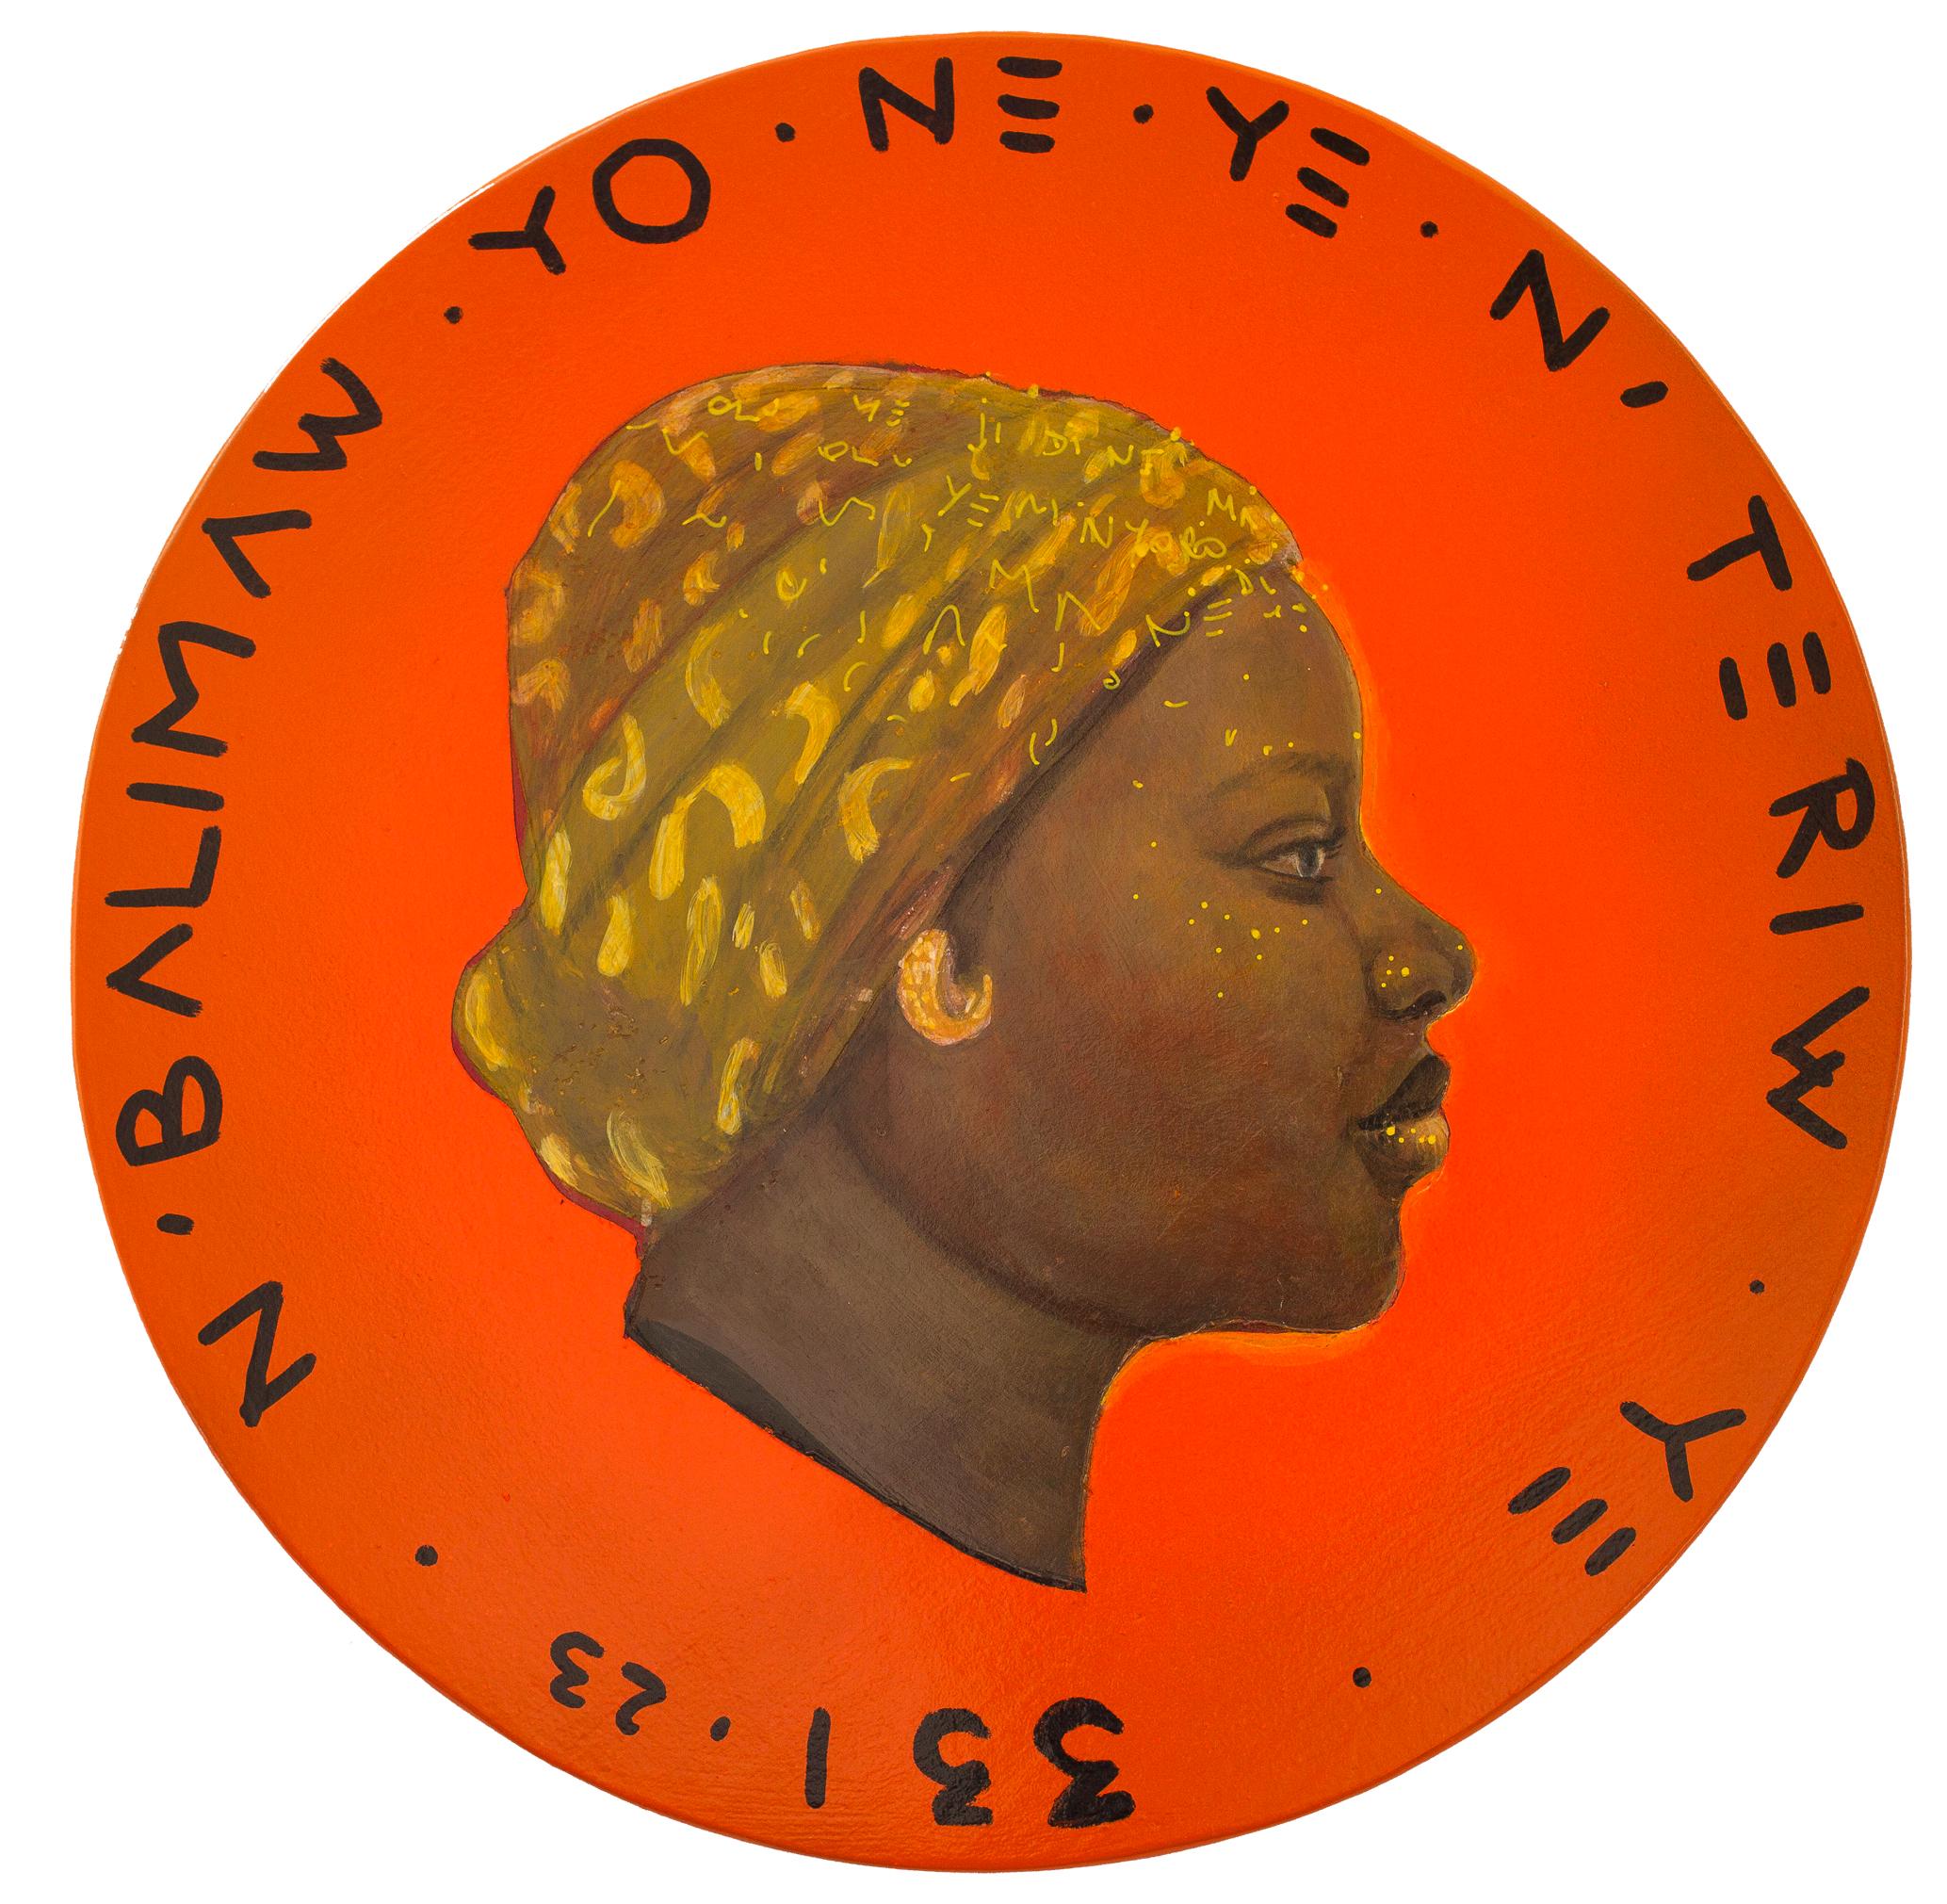 African Woman Profile Colorful Portrait on Wooden Coin. Orange "Currency #198" - Mixed Media Art by Natasha Lelenco